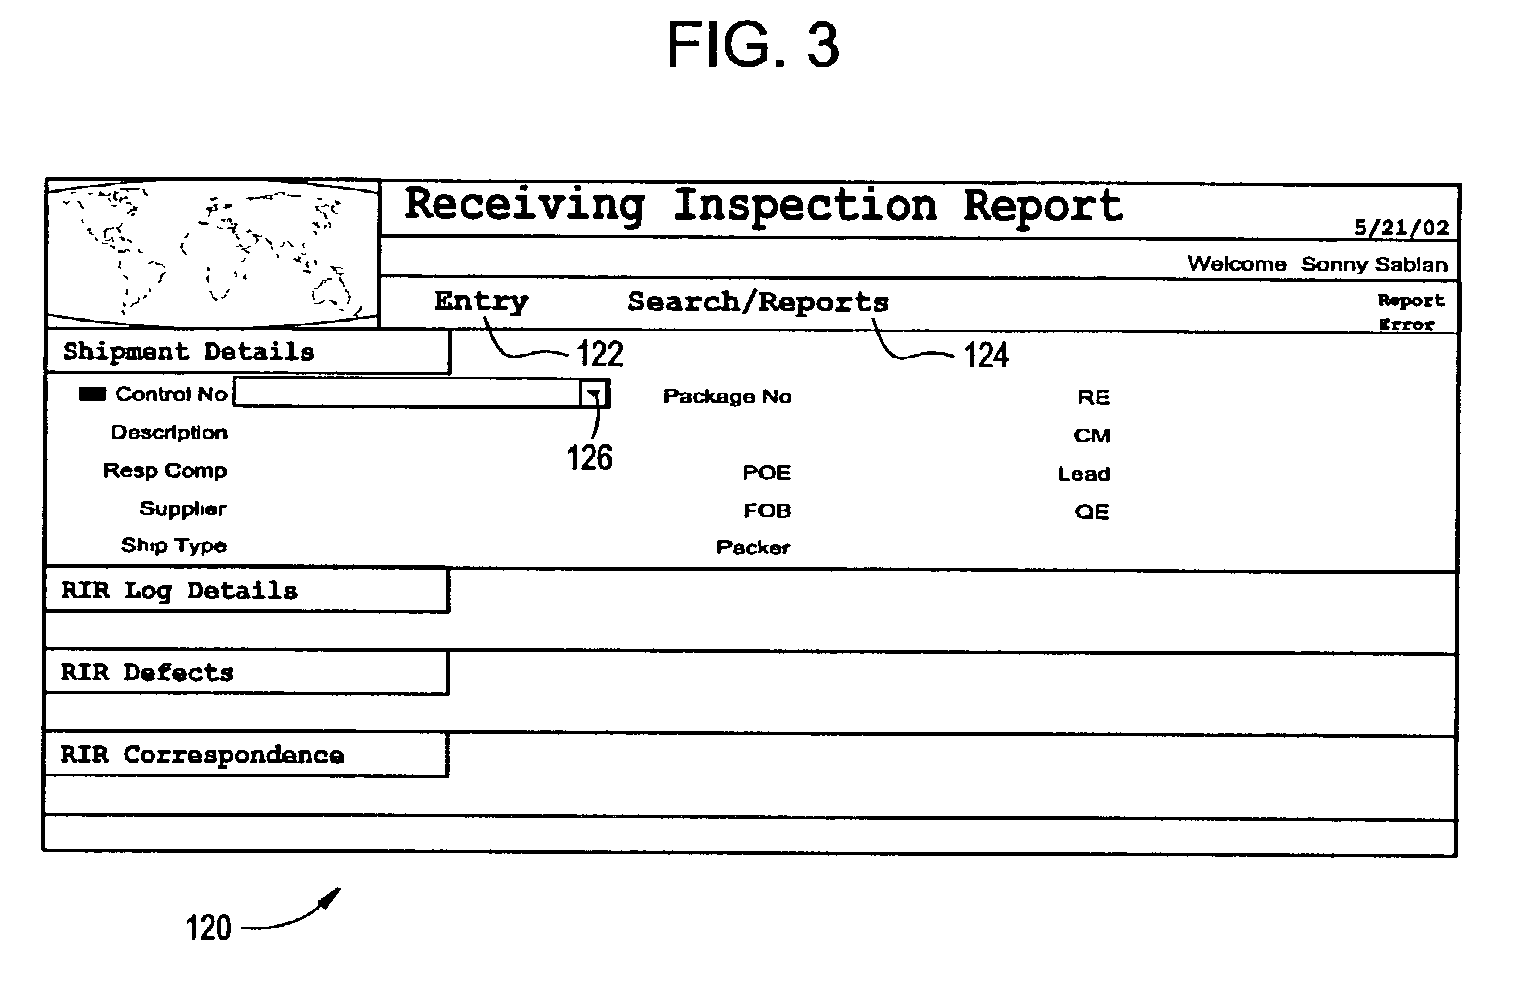 System providing receipt inspection reporting